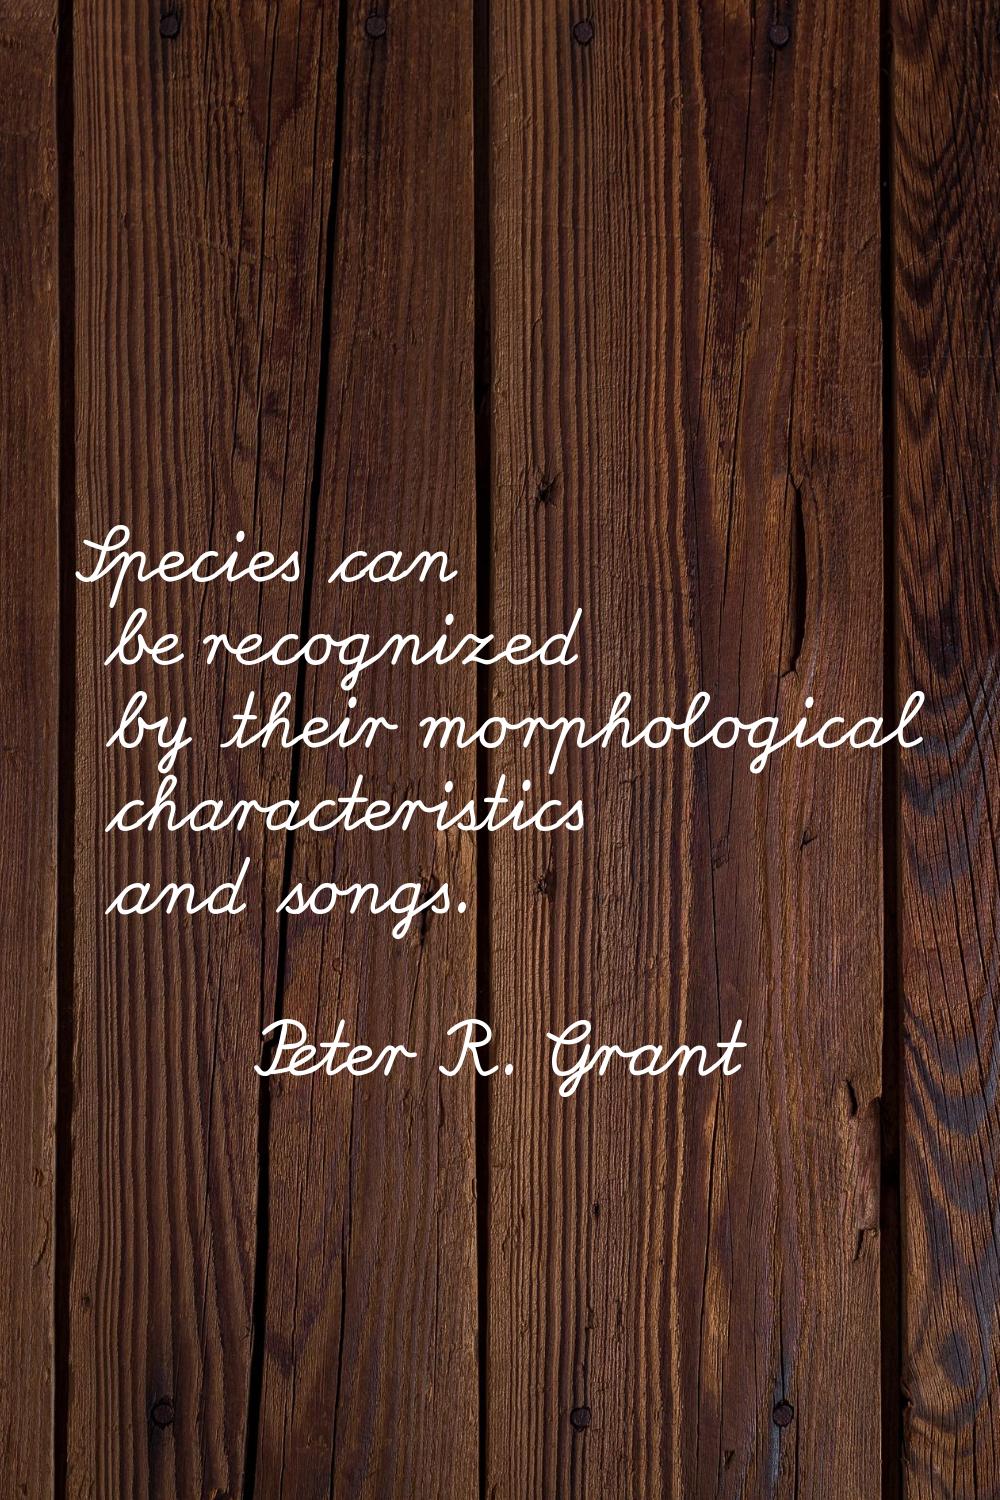 Species can be recognized by their morphological characteristics and songs.